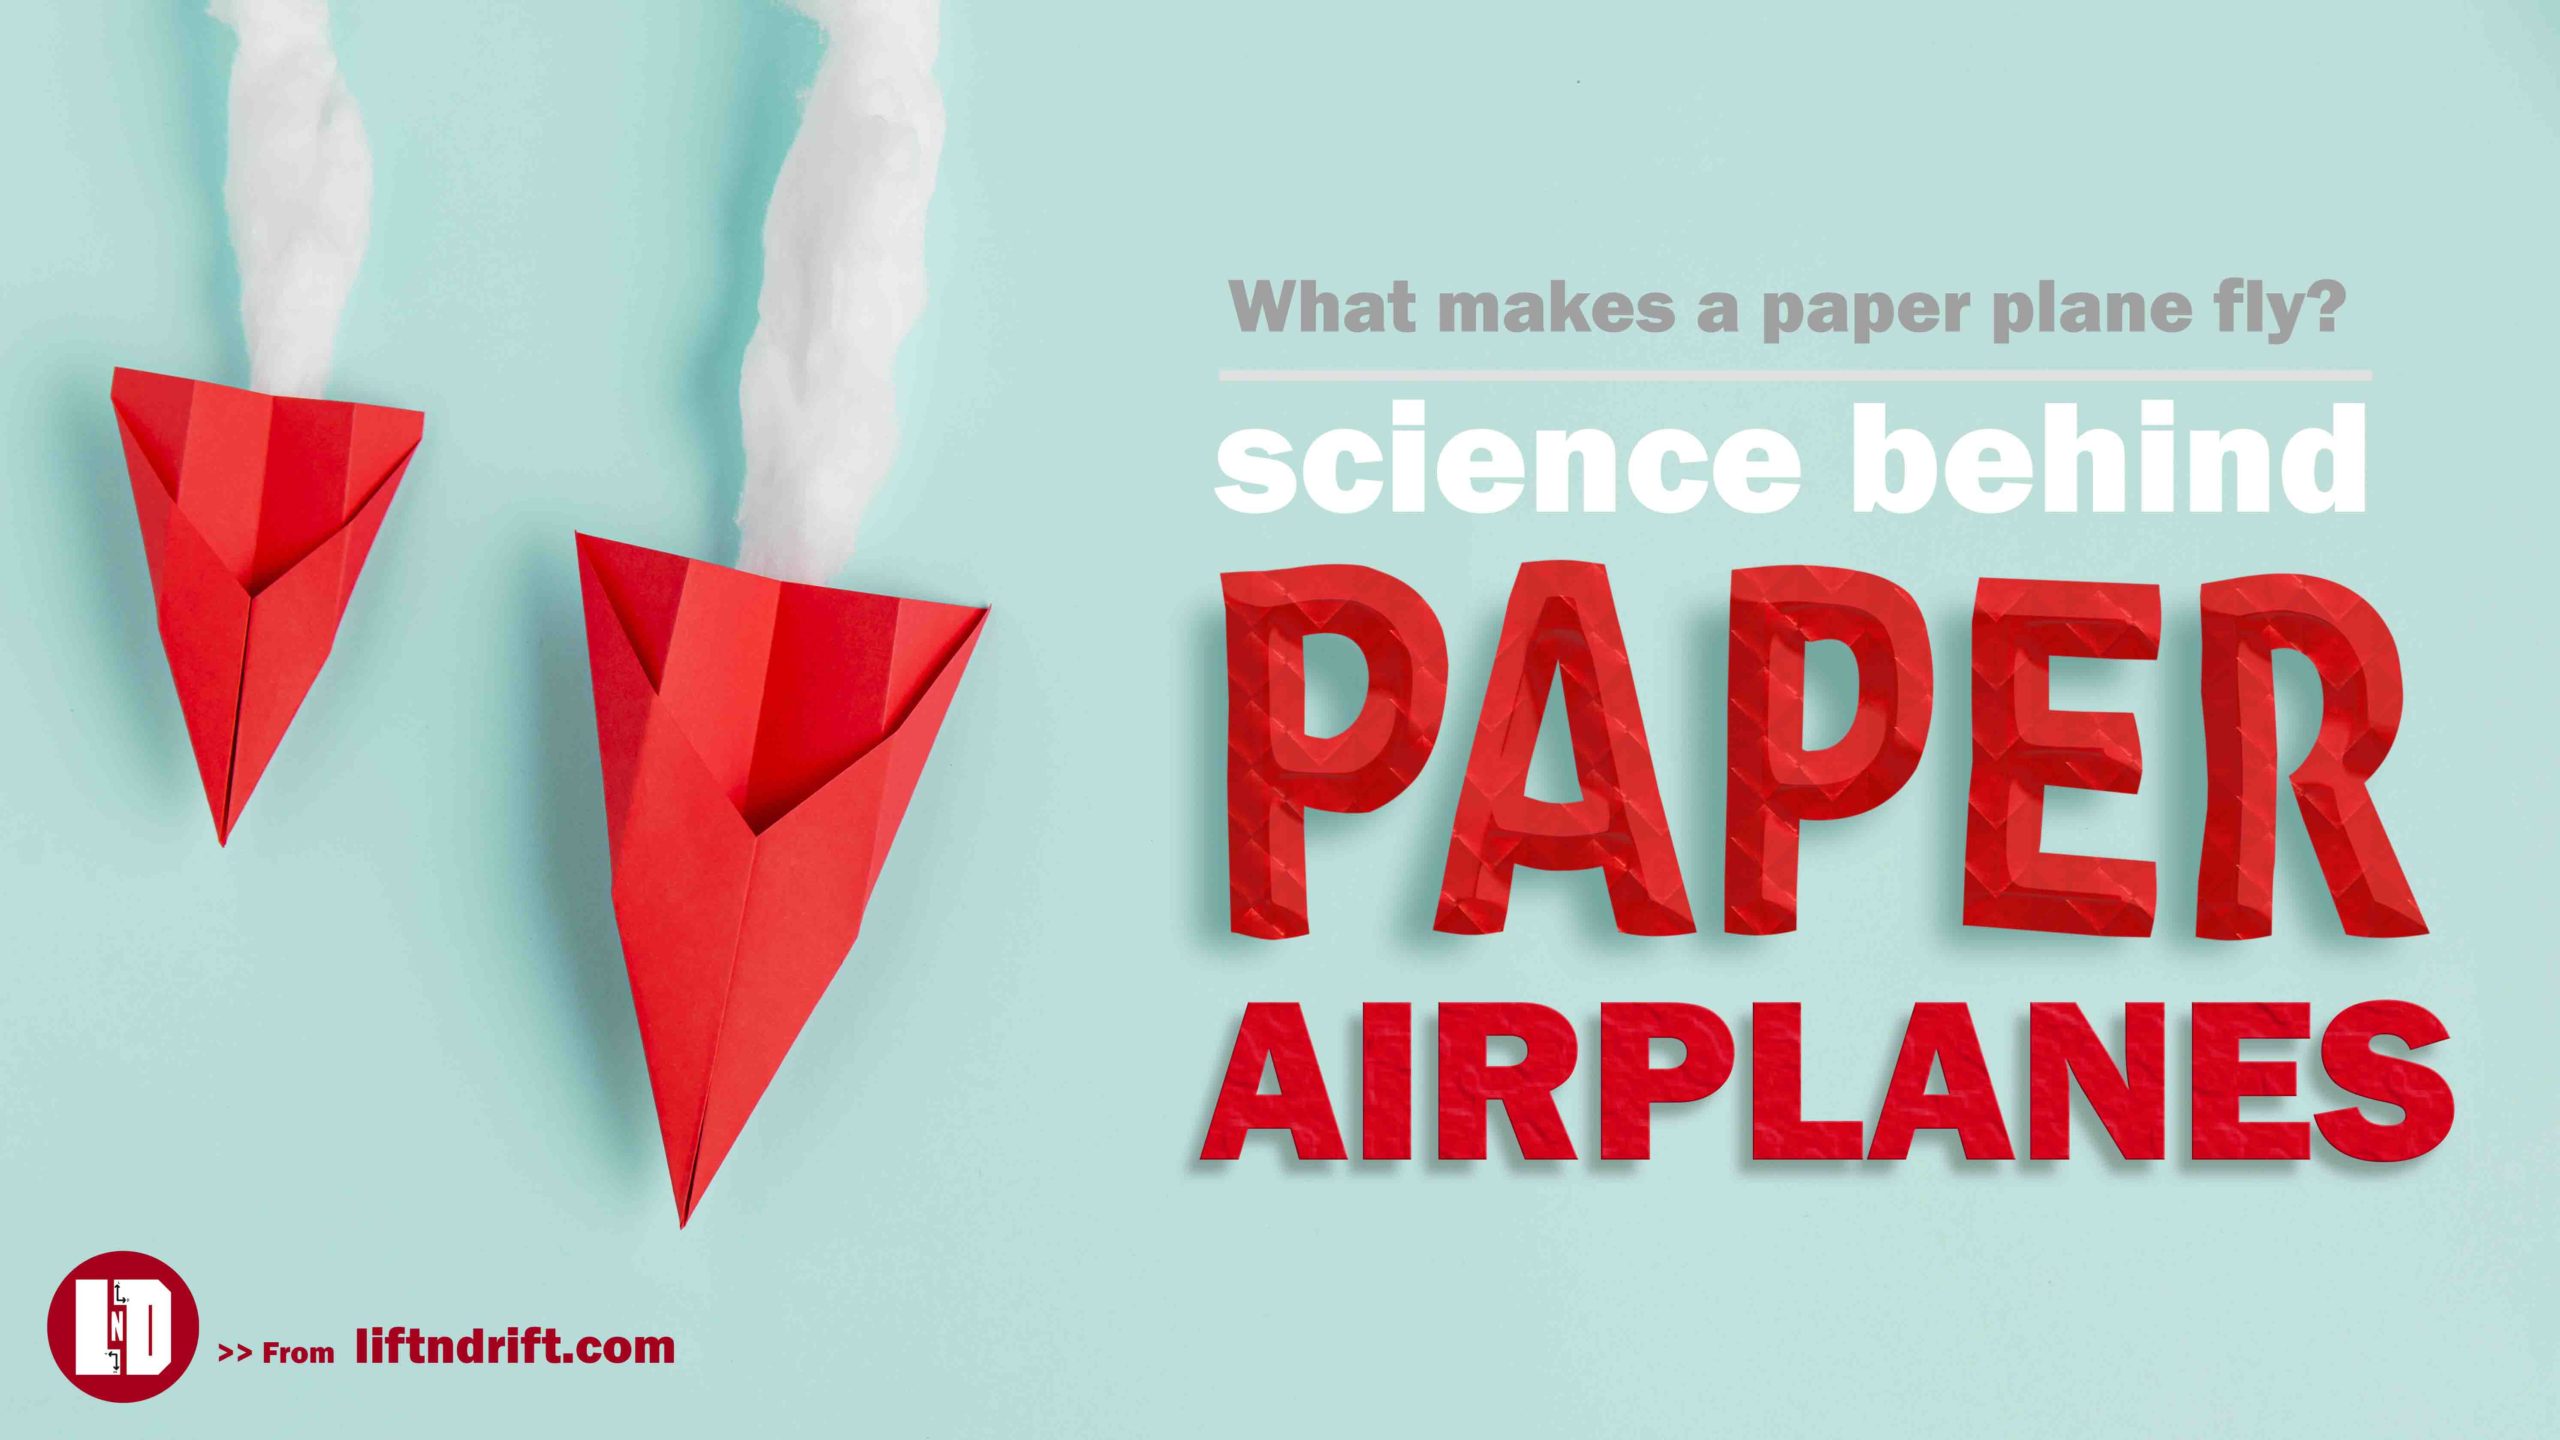 What is the Science behind paper airplanes | What makes paper plane fly?